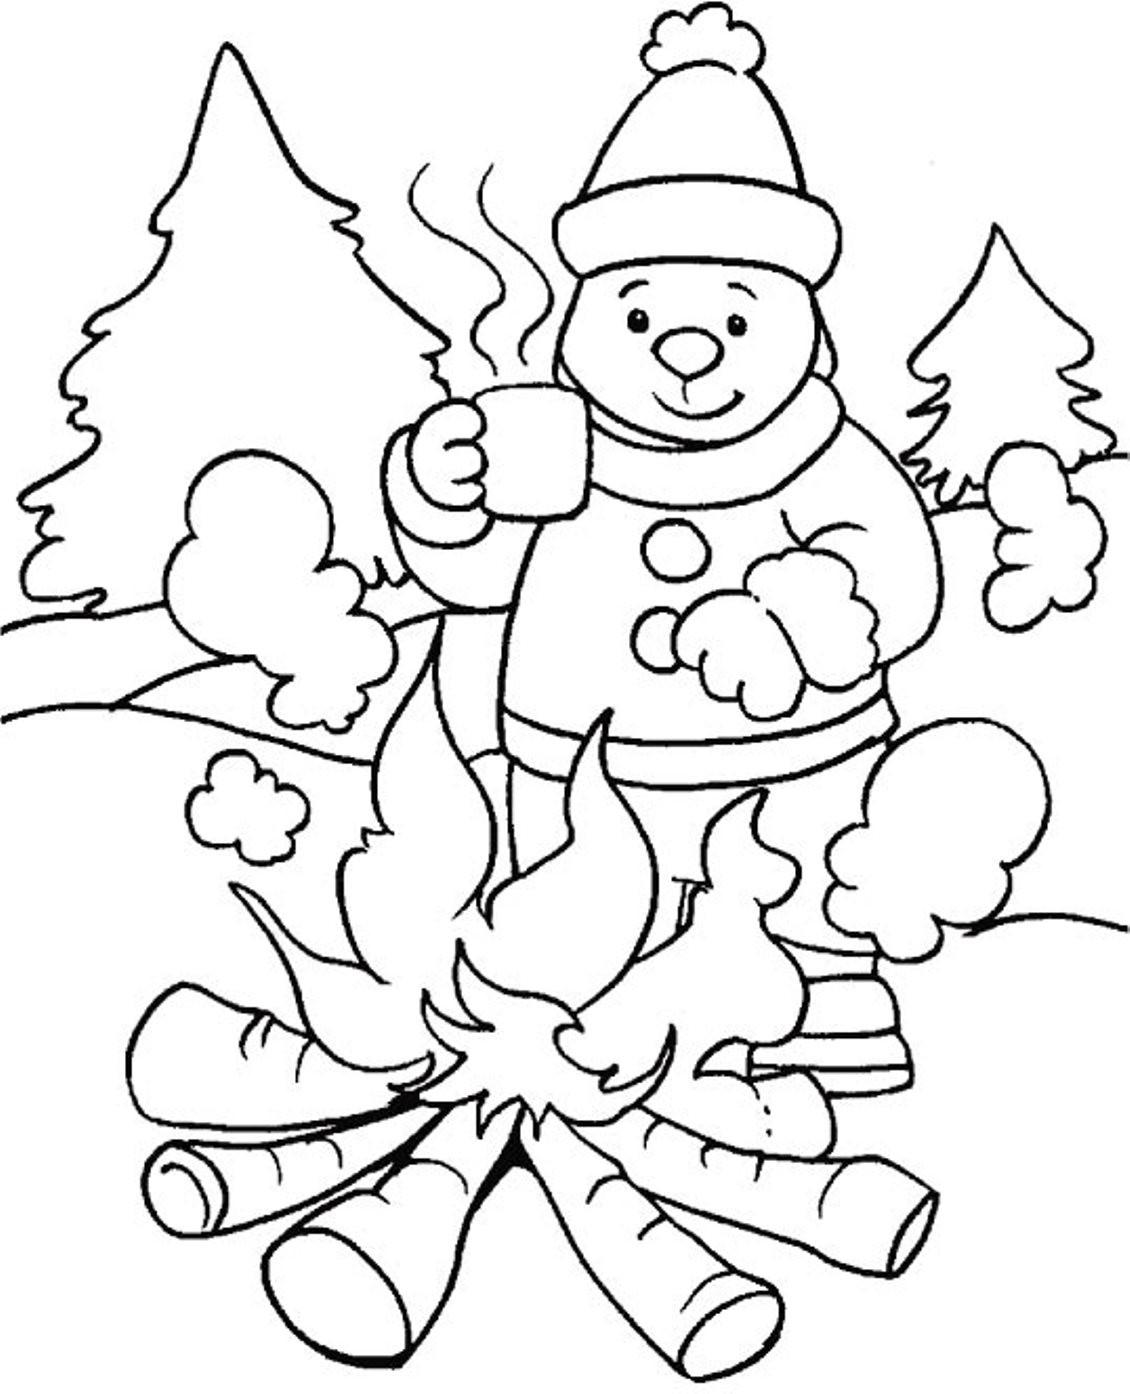 Winter Coloring Pages For Toddlers
 Free Printable Winter Coloring Pages For Kids